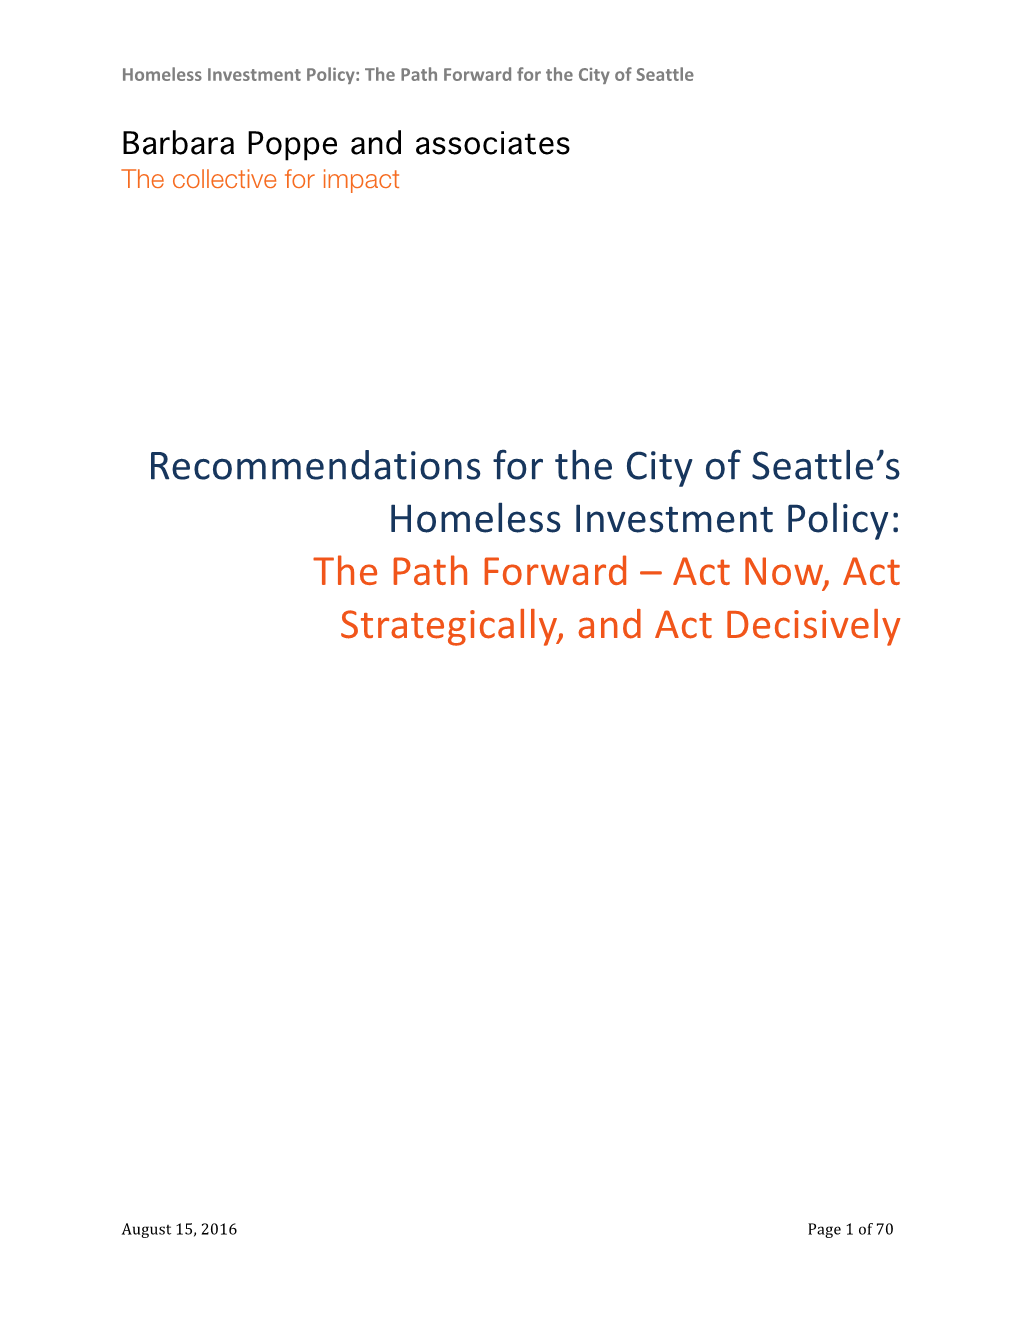 Recommendations for the City of Seattle's Homeless Investment Policy